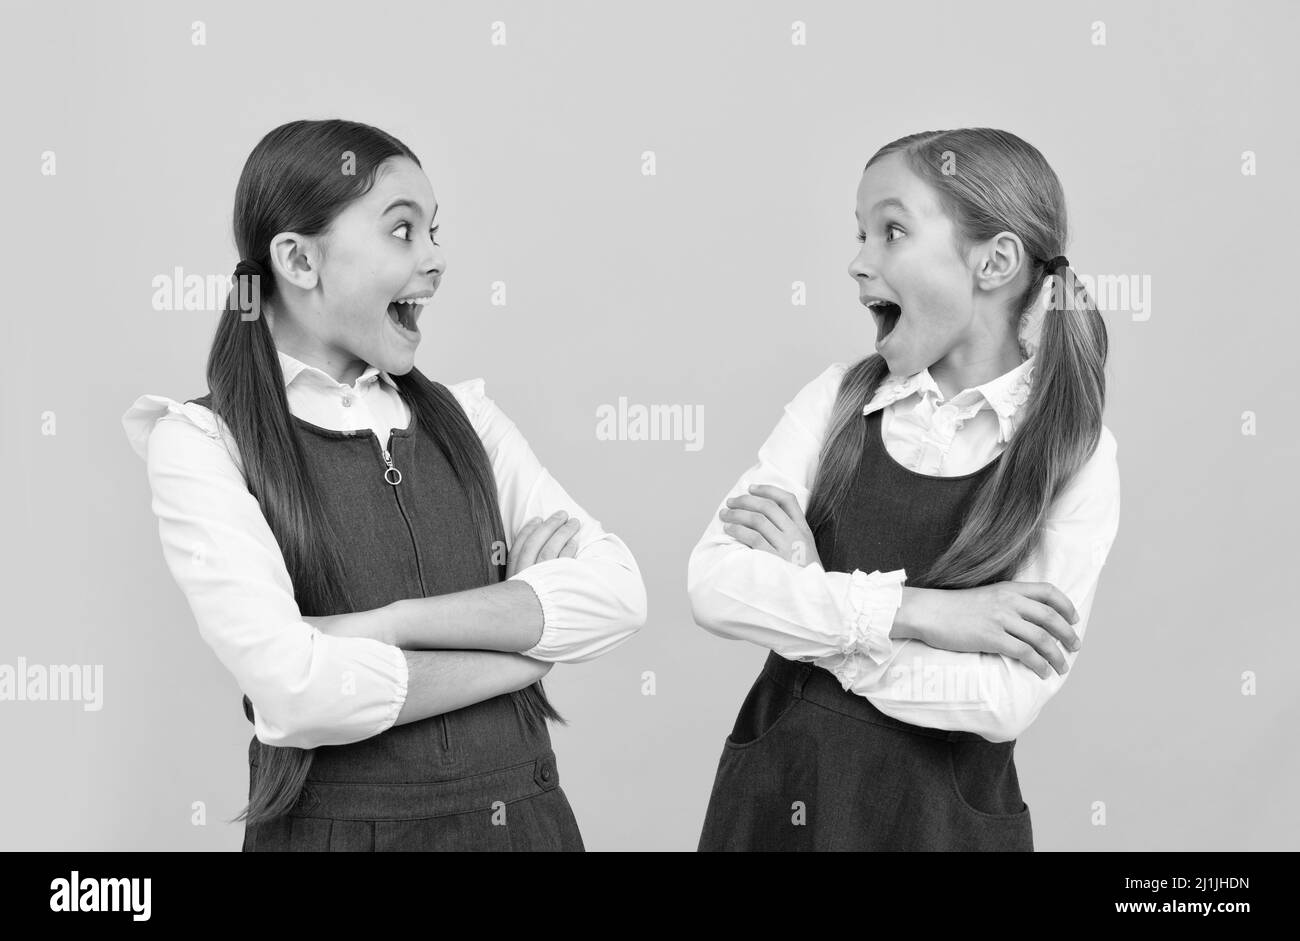 Surprised little kids look at each other with open mouths in formal school uniforms, surprise Stock Photo